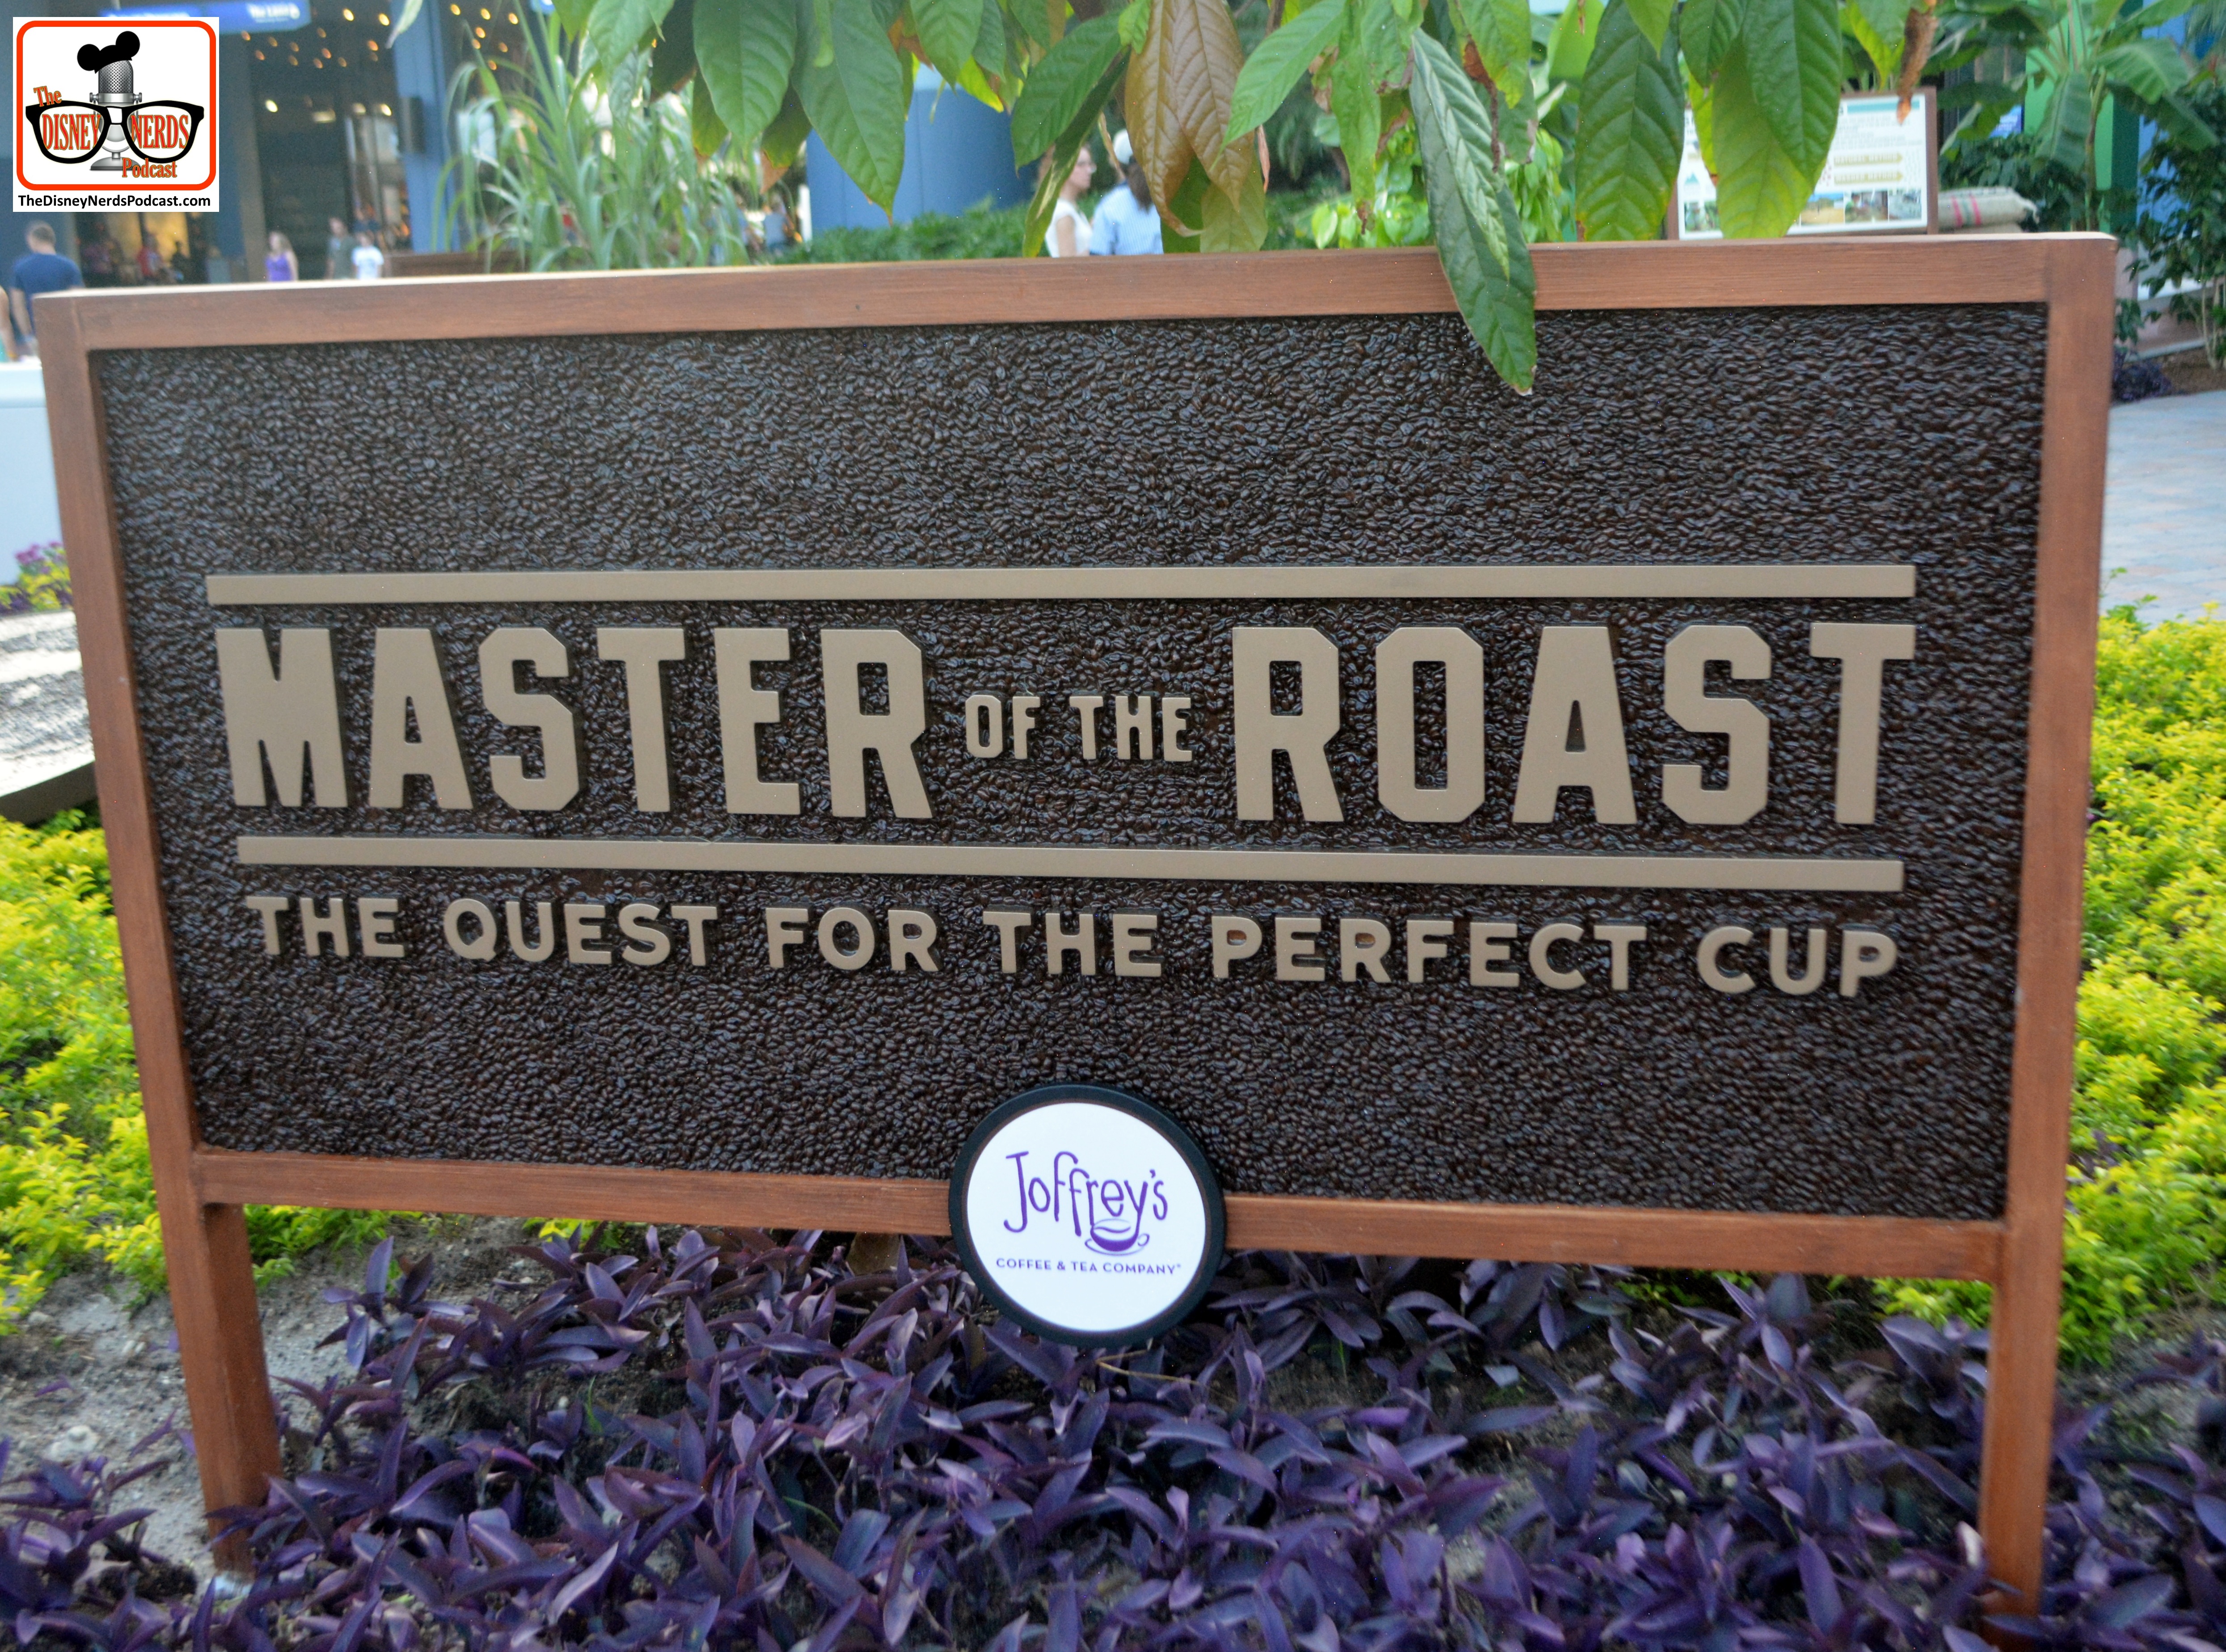 Master of the Roast, The Quest for the Perfect Cup - sponsored by Joffery's Coffee